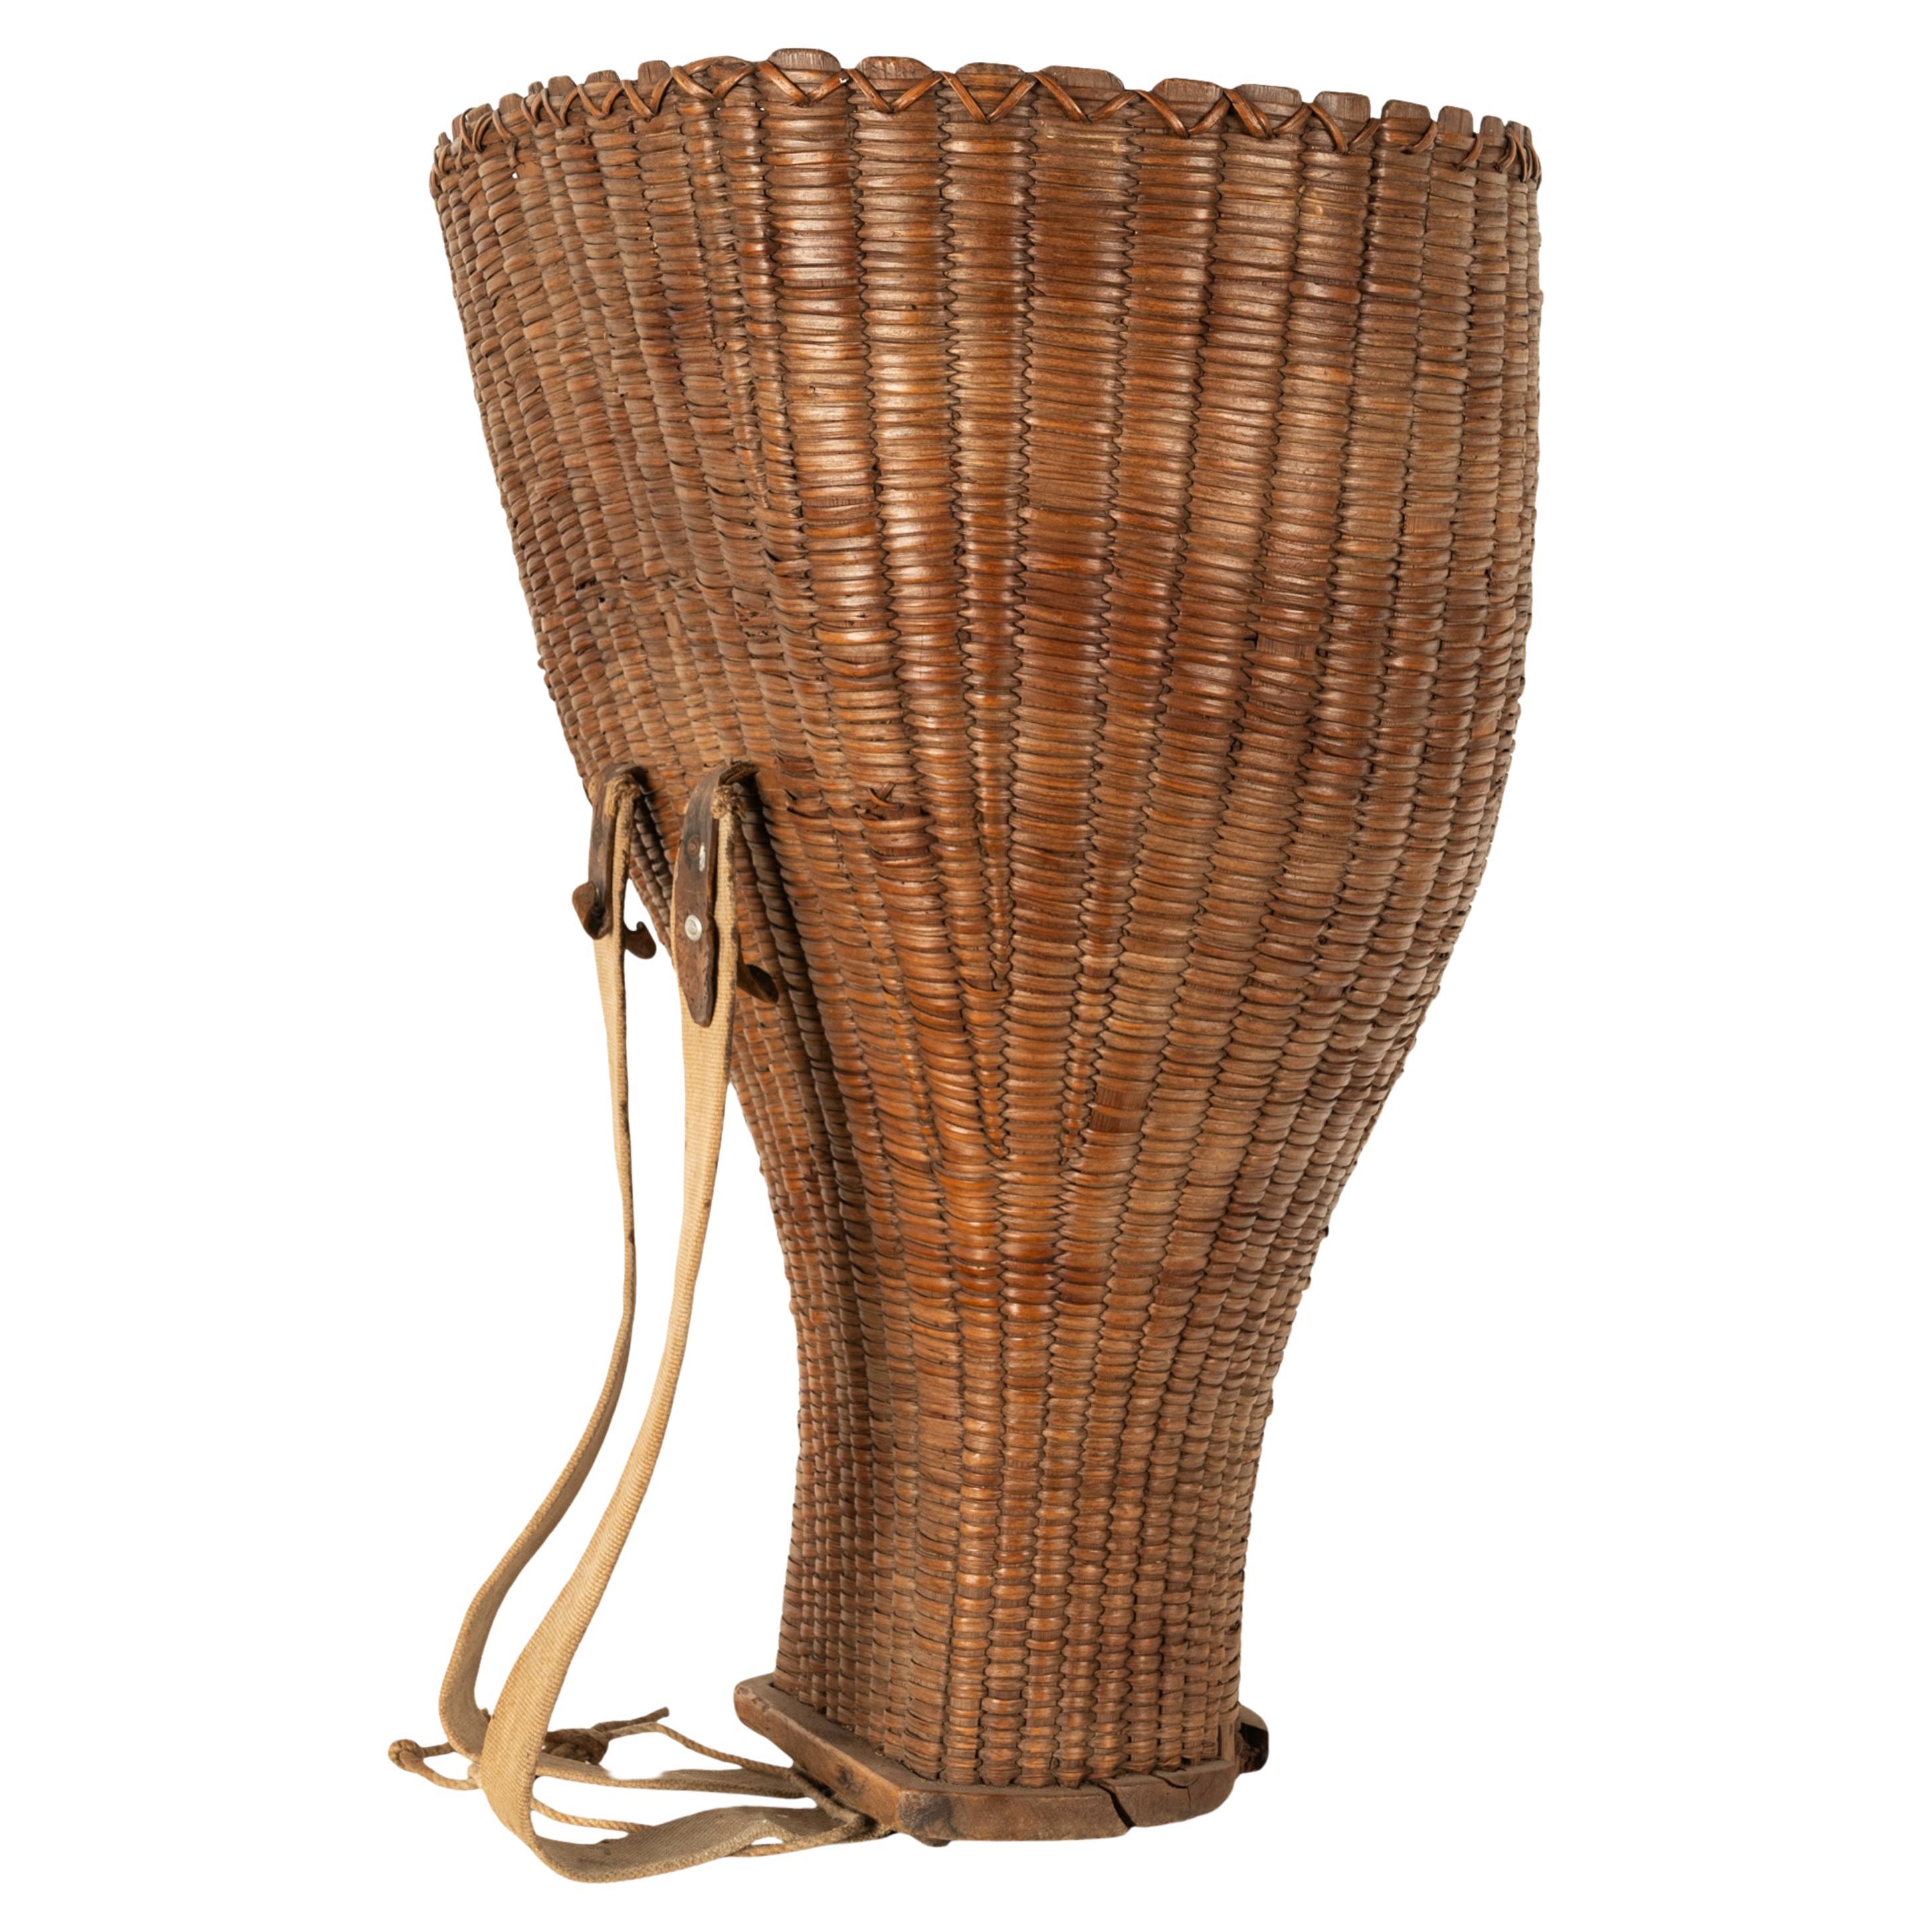 A large, rare & unusual antique 19th Century French grape picking basket from Chateau  Margaux, Bordeaux, France, circa 1870.
This very large 19th century French footed vineyard basket used for harvesting grapes, with leather straps for carrying.